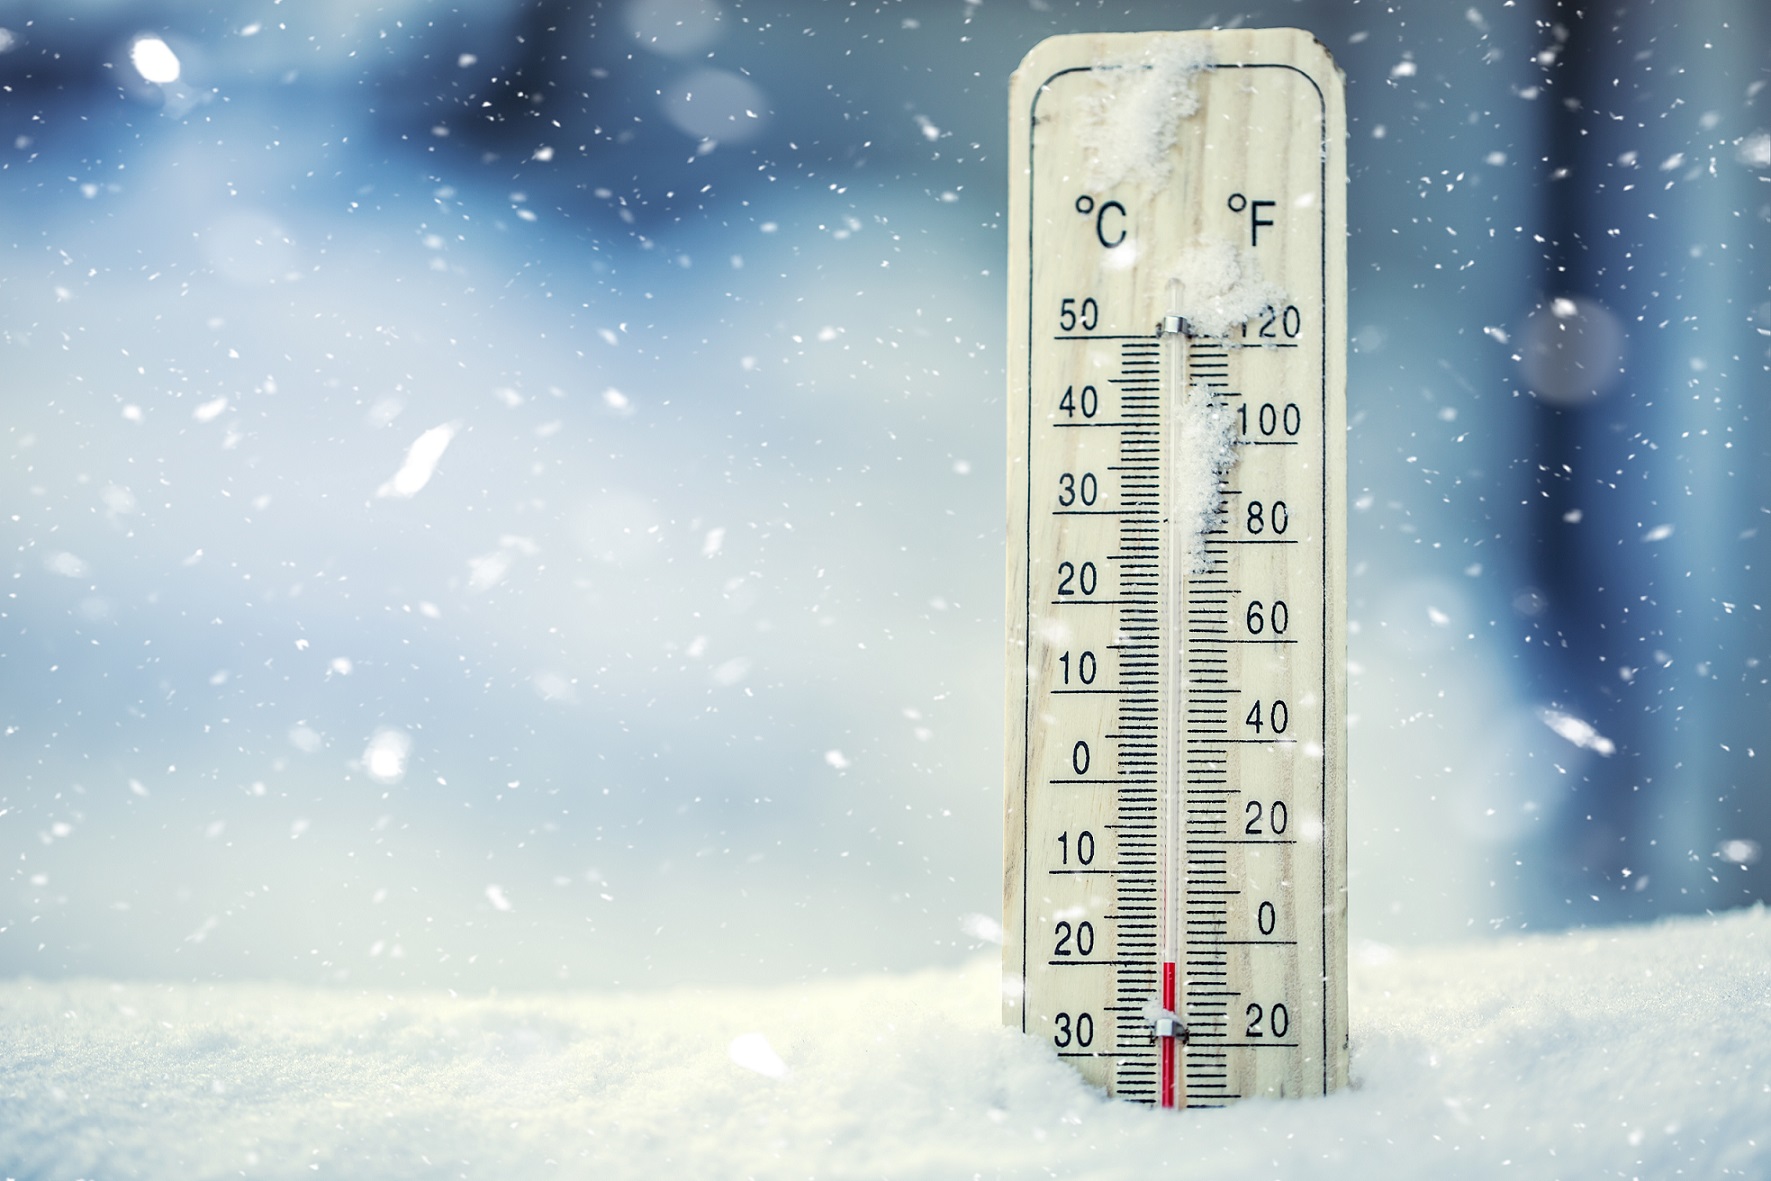 Thermometer on snow shows low temperatures under zero. Low temperatures in degrees Celsius and fahrenheit. Cold winter weather twenty under zero